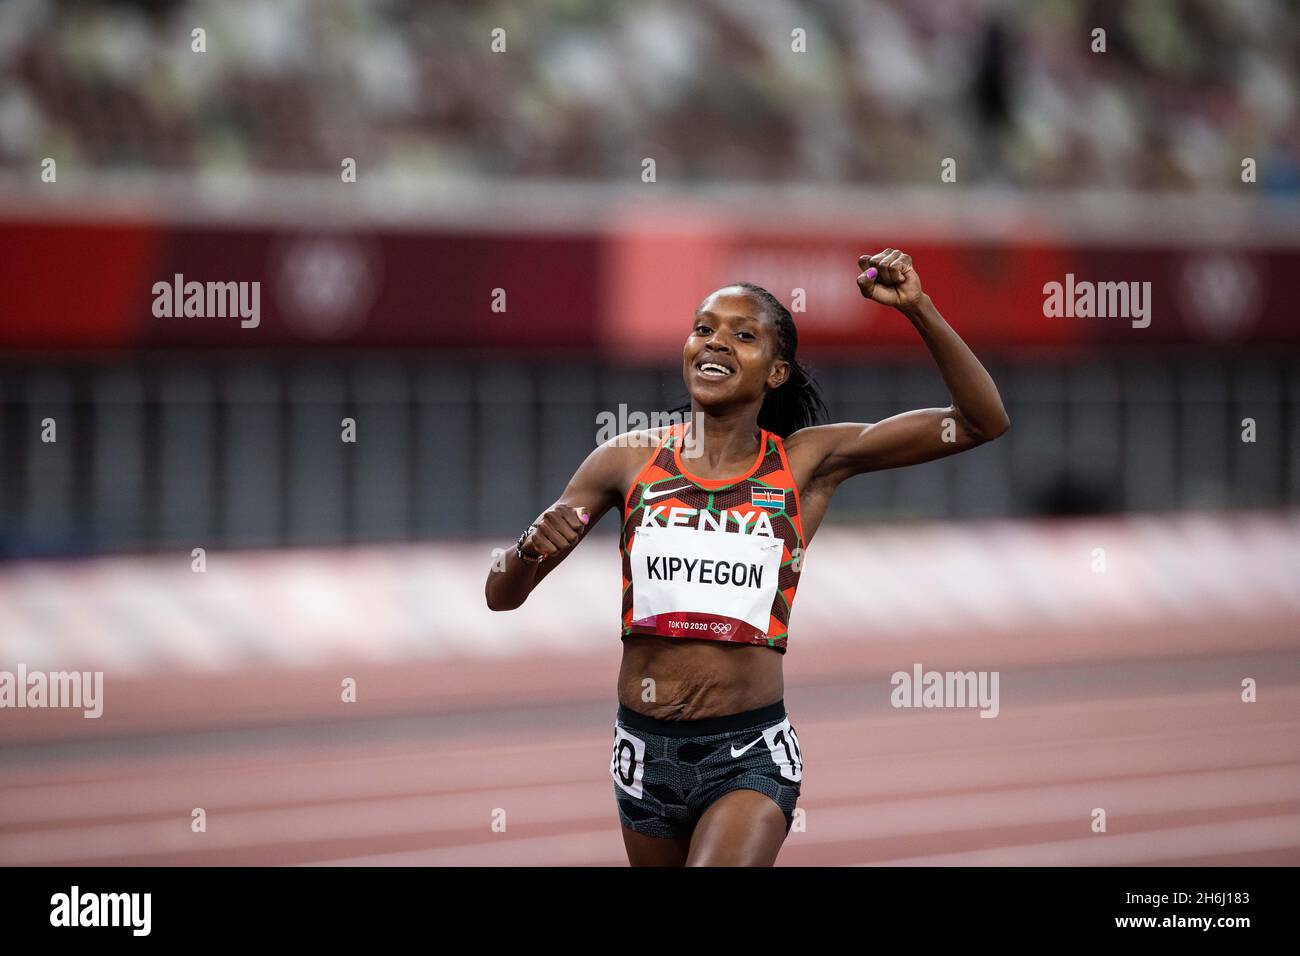 Faith Kipyegon of Kenya wins the 1500m final in the 2020 Tokyo Olympic Games. Stock Photo